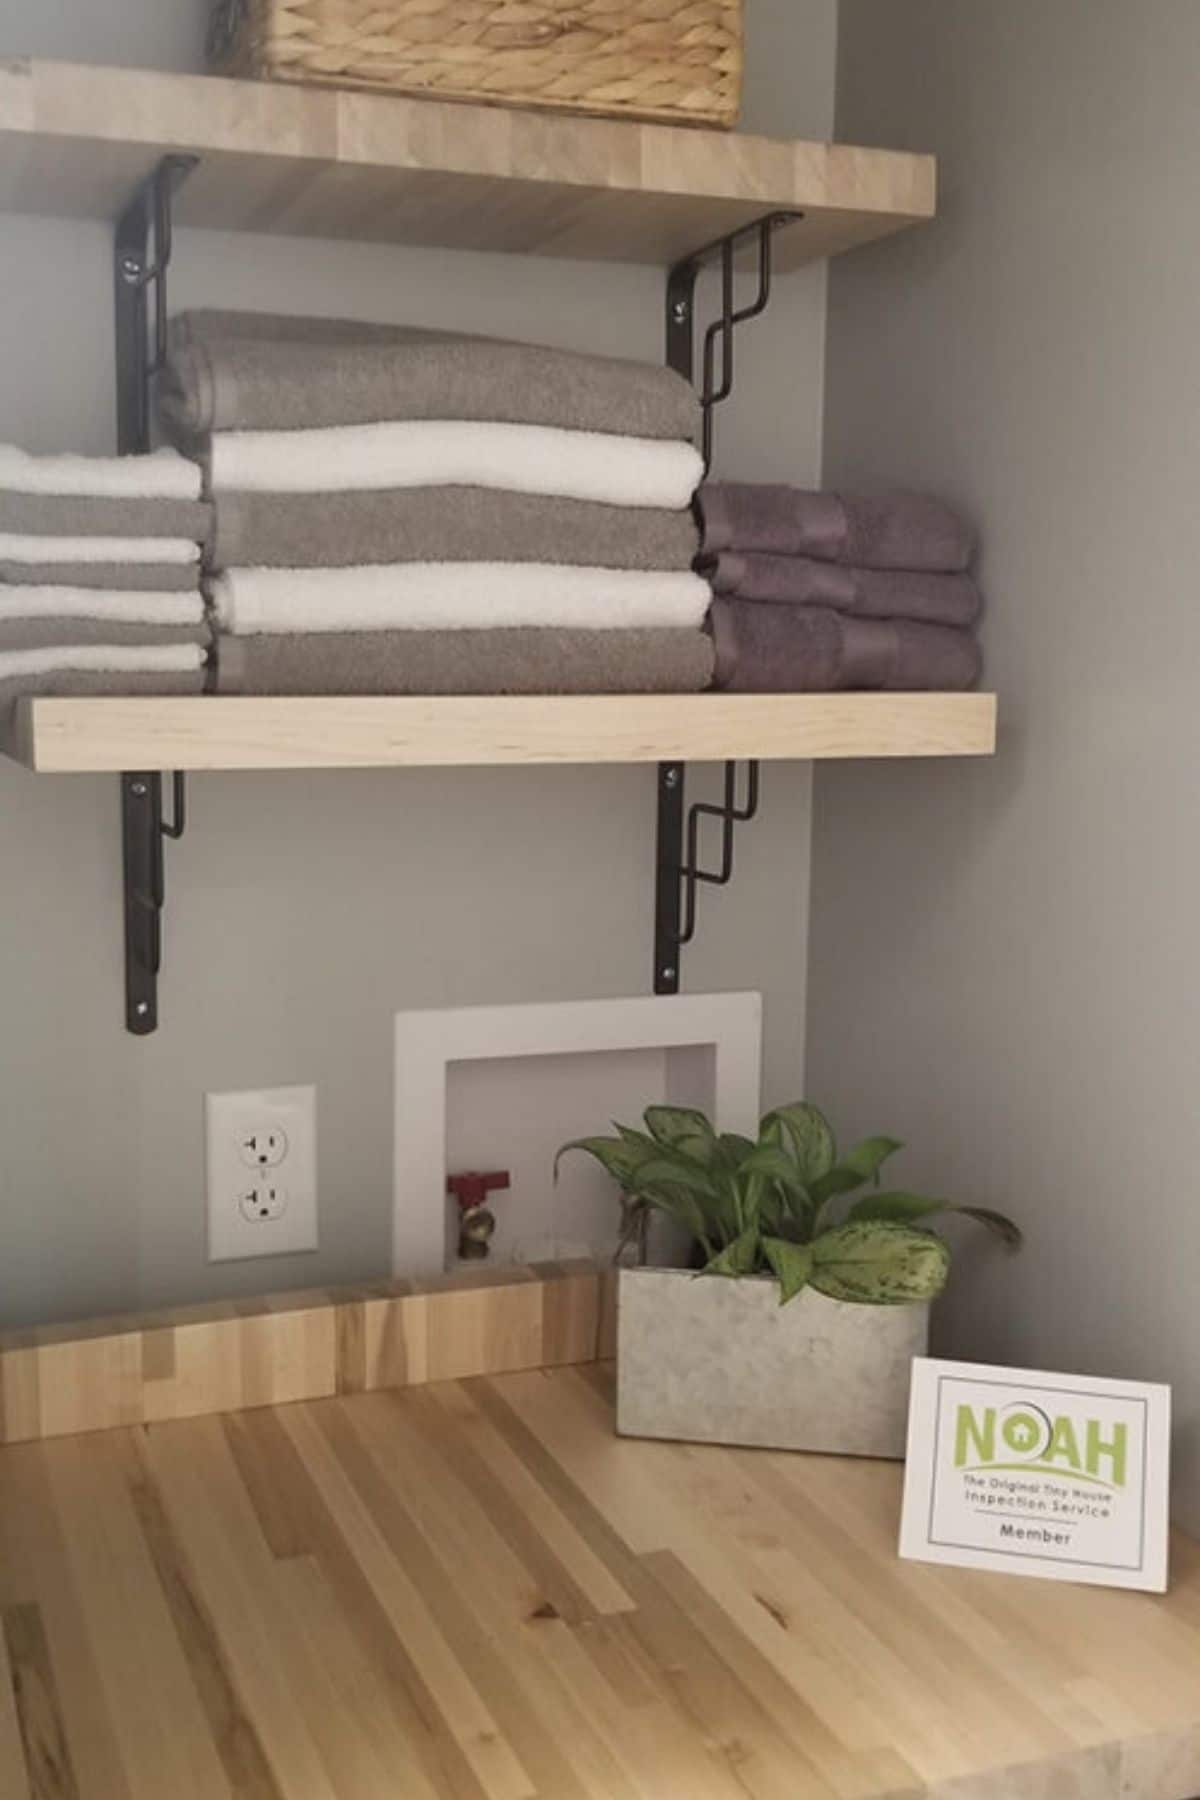 shelves above butcher block counter loaded with towels